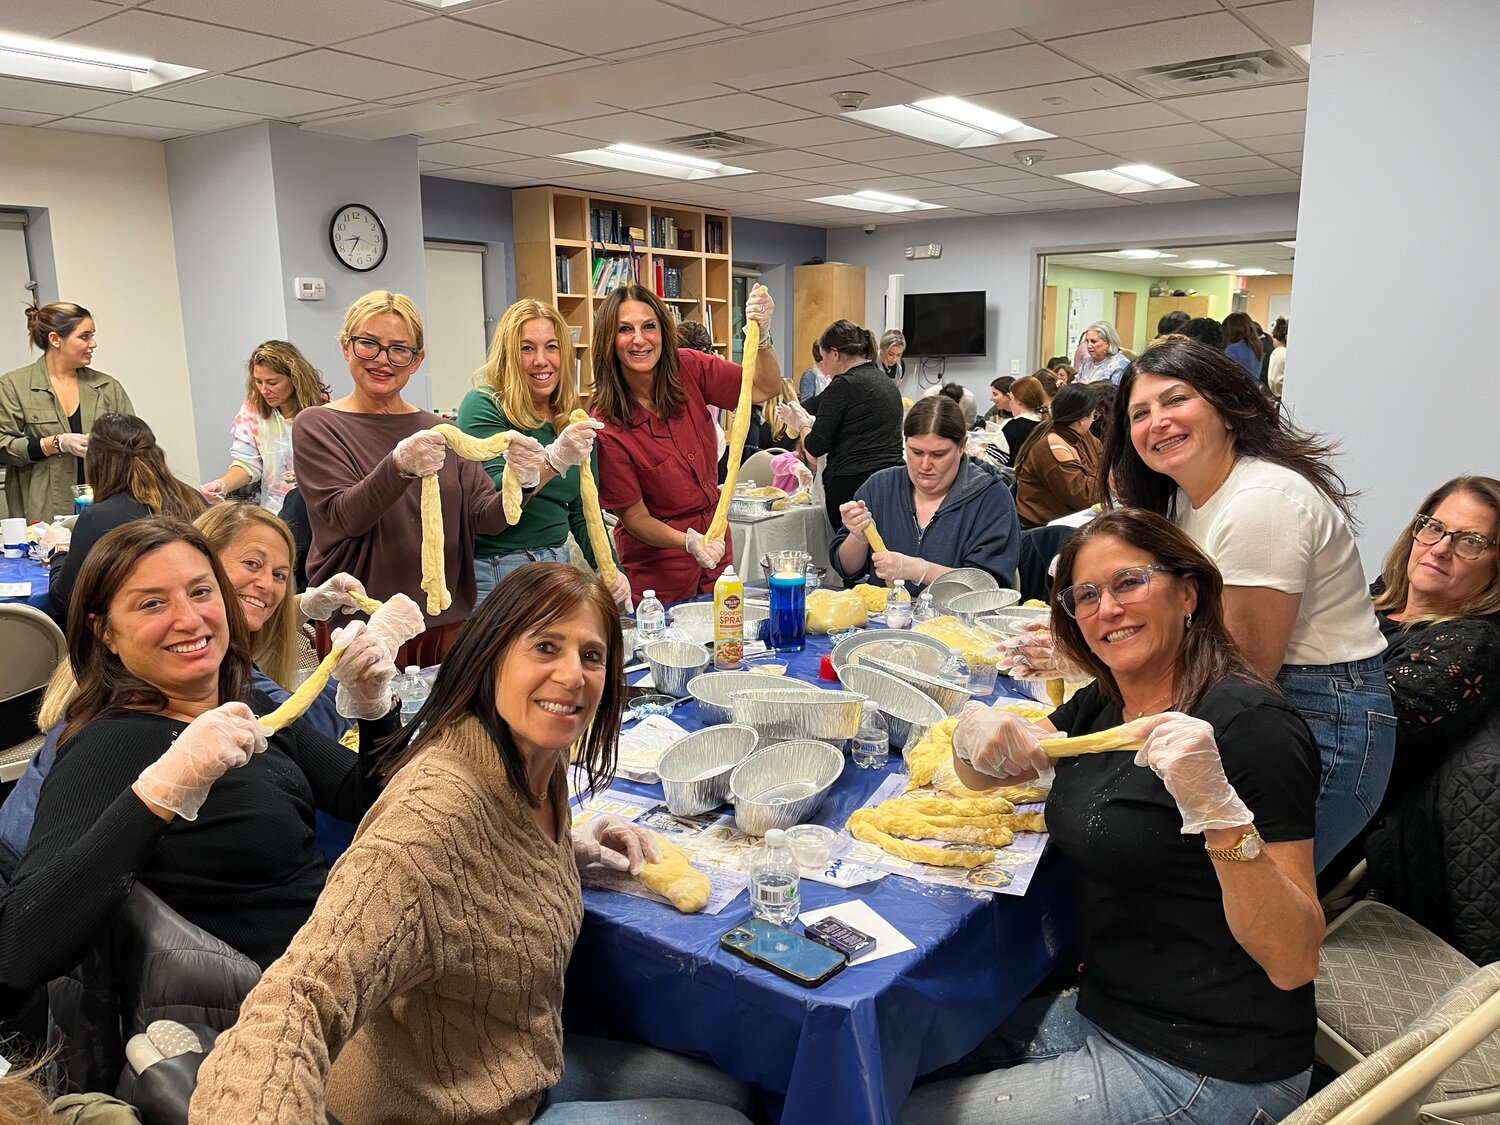 Shaping dough to make Challah is one of the many mitzvahs that Jewish women are performing to offer soiritual support for Israeli citizens.